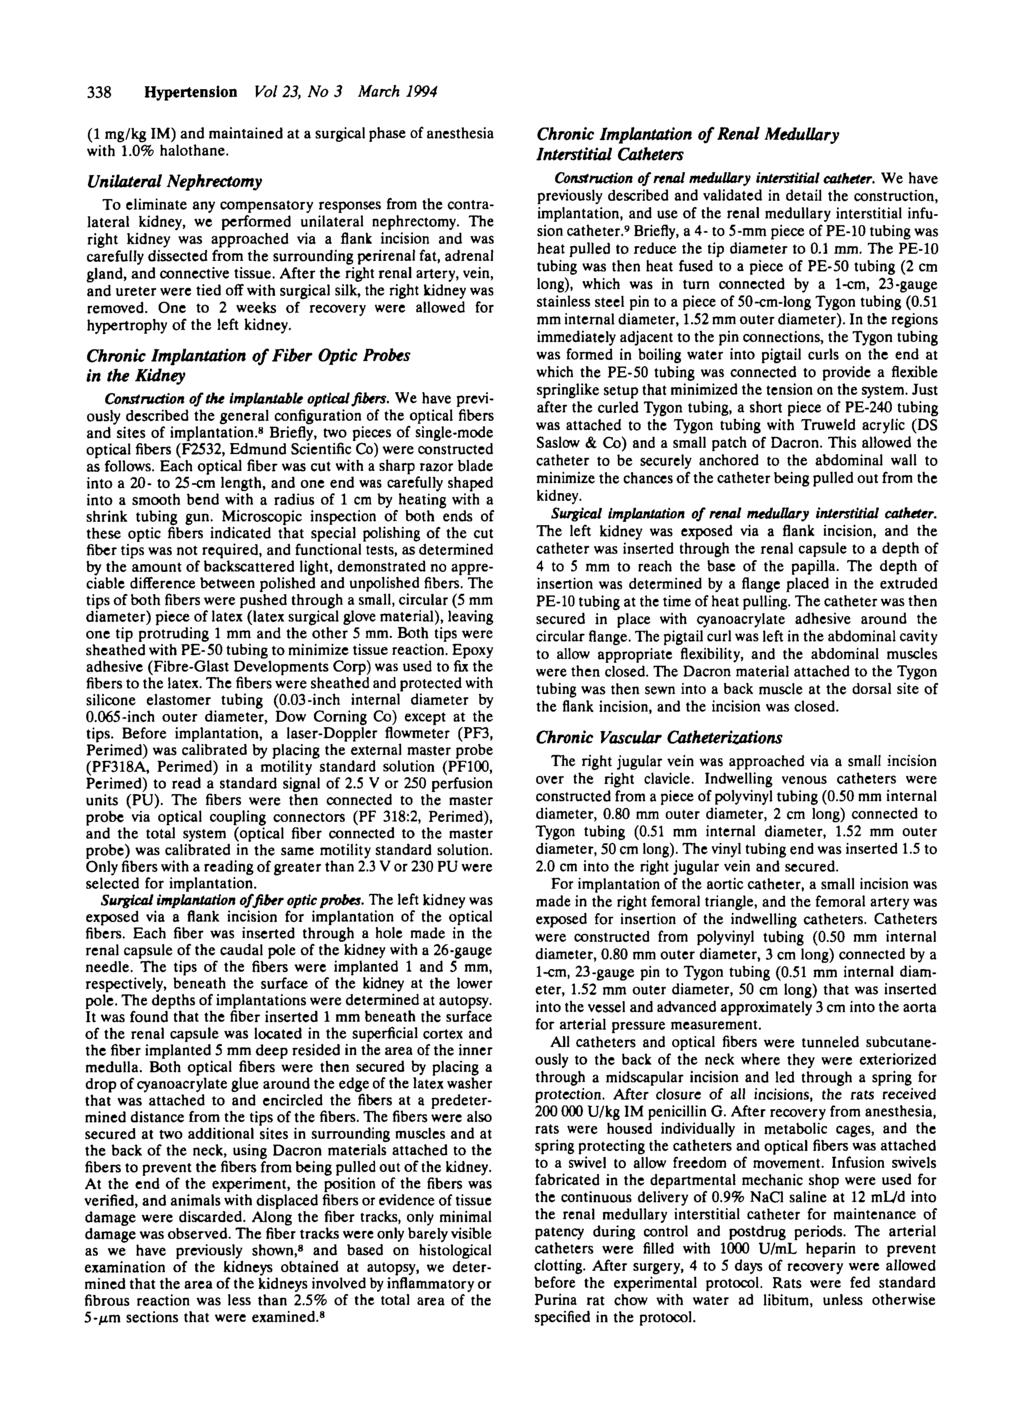 338 Hypertension Vol 23, No 3 March 1994 (1 mg/kg IM) and maintained at a surgical phase of anesthesia with 1.0% halothane.